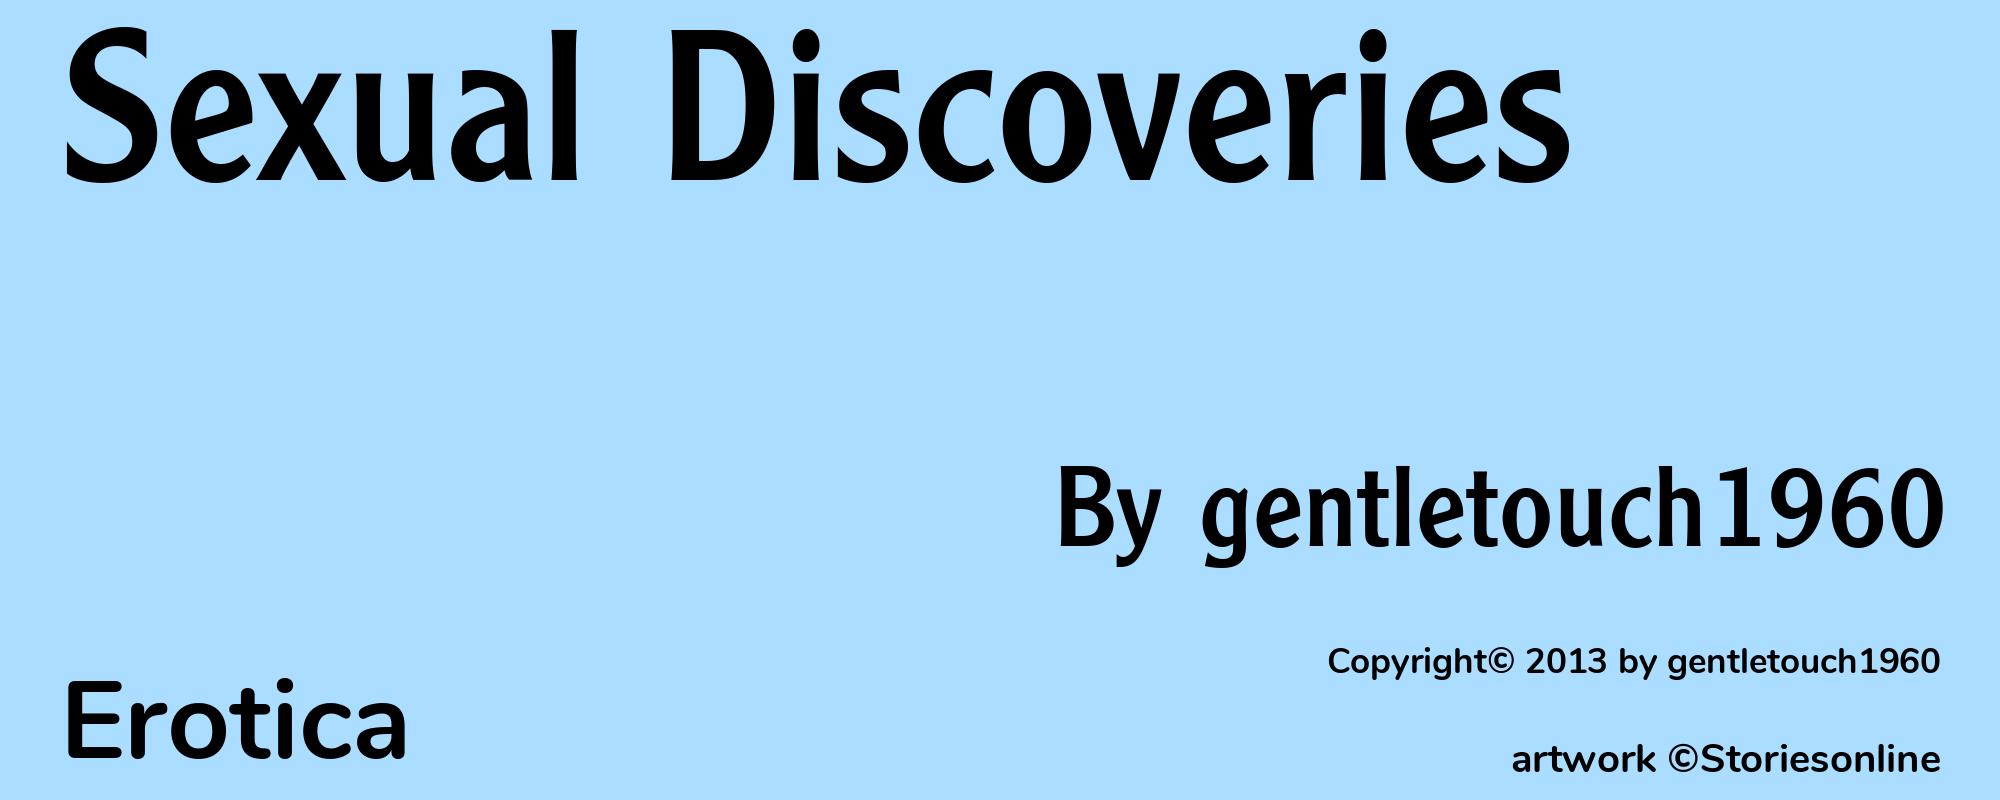 Sexual Discoveries - Cover